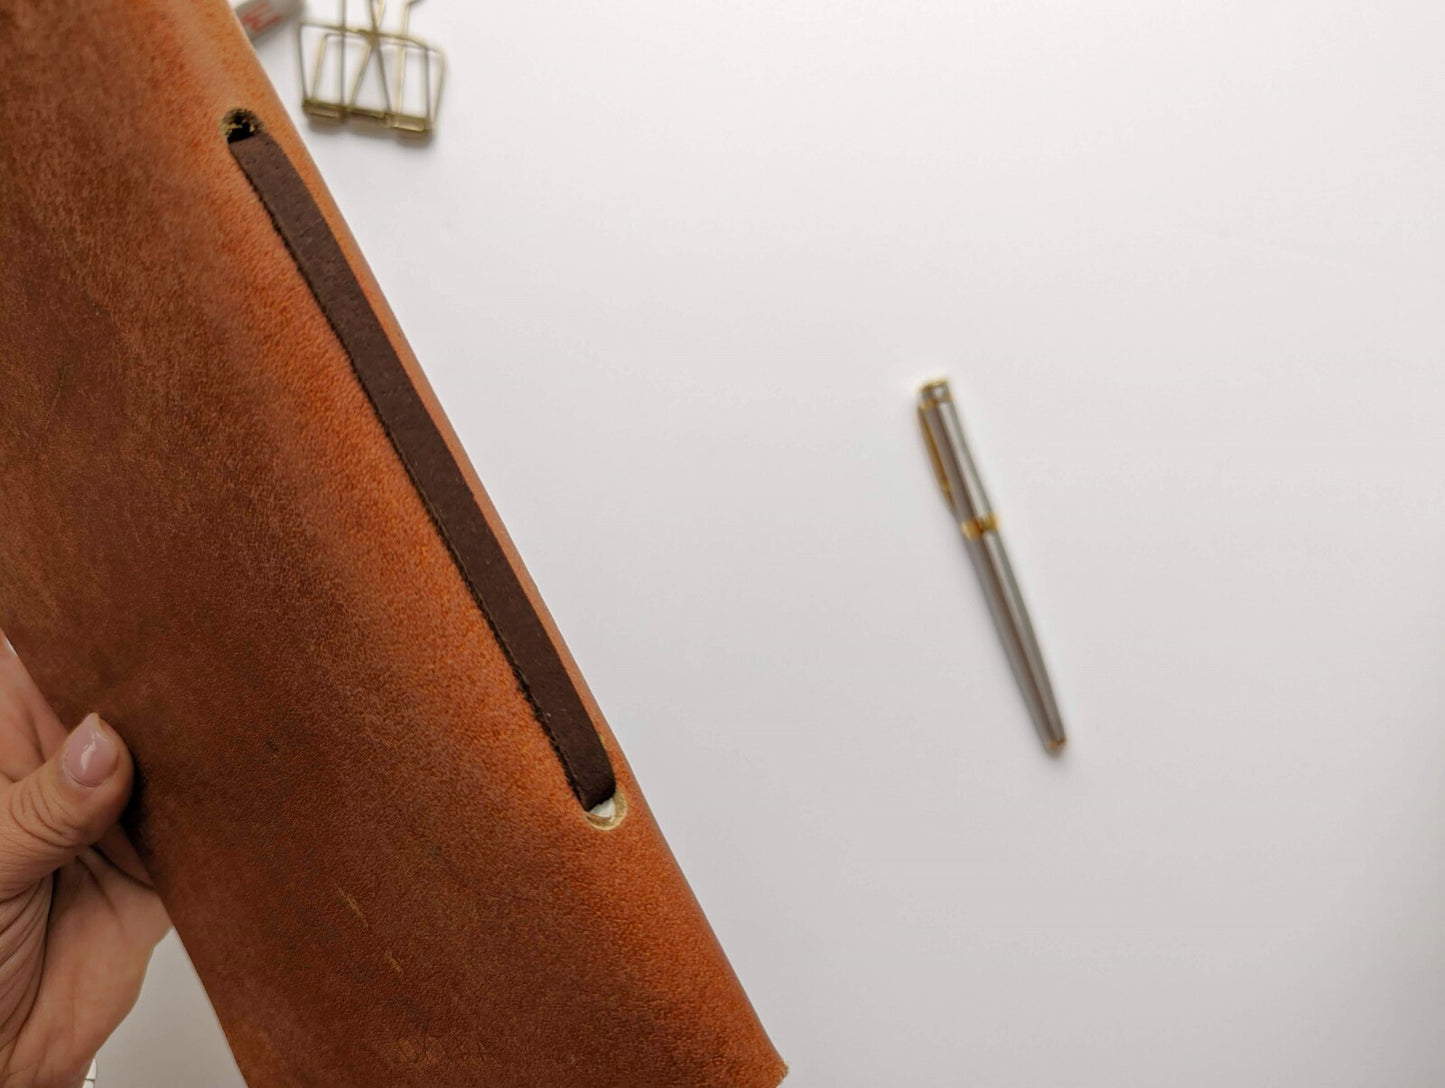 Leather Notebook - Tan